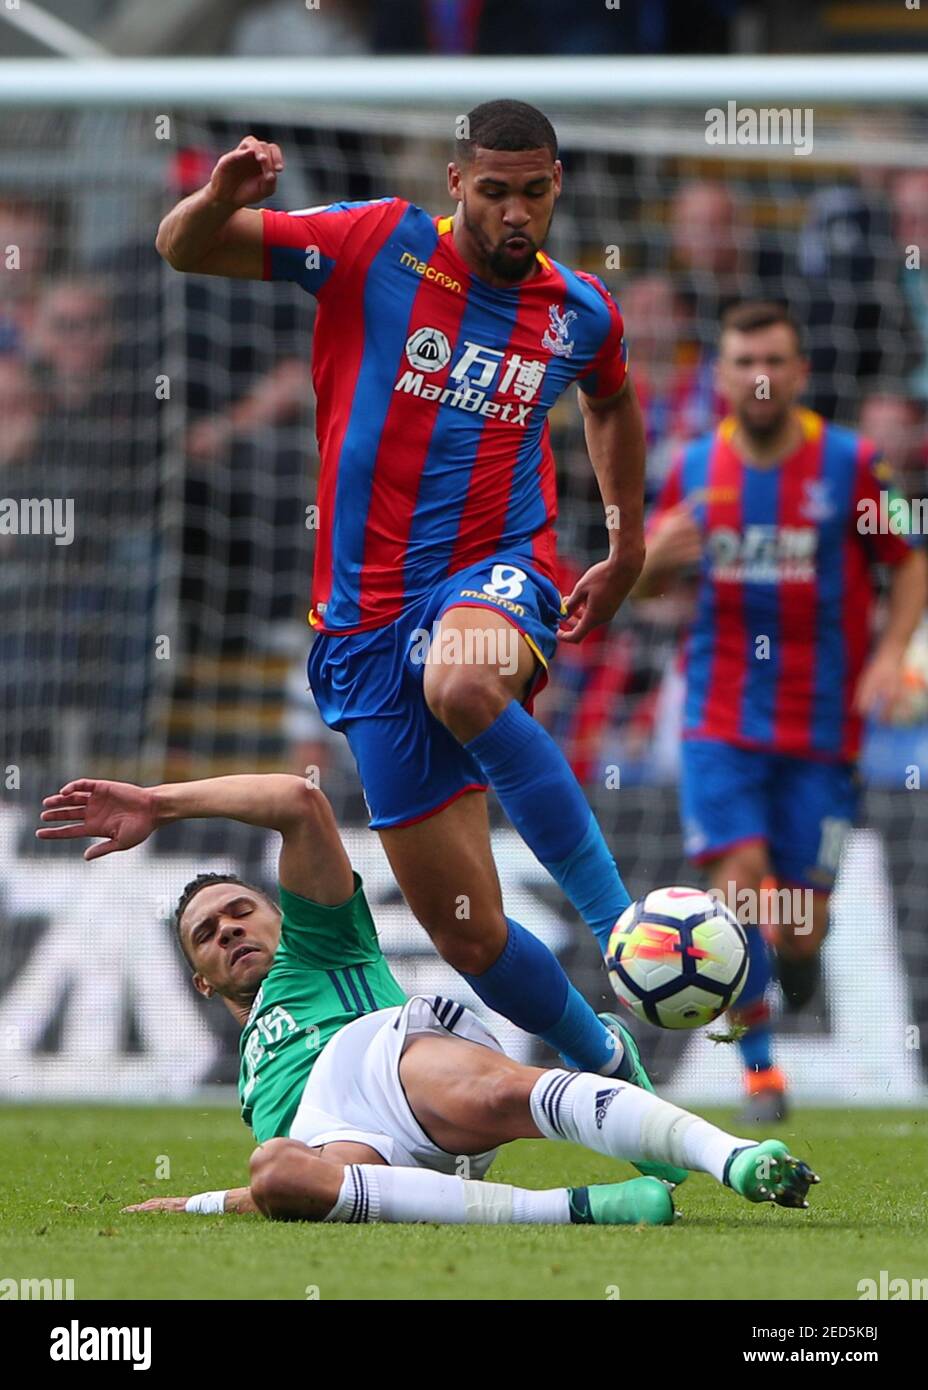 Soccer Football - Premier League - Crystal Palace vs West Bromwich Albion - Selhurst Park, London, Britain - May 13, 2018   Crystal Palace's Ruben Loftus-Cheek in action with West Bromwich Albion's Kieran Gibbs    REUTERS/Hannah McKay    EDITORIAL USE ONLY. No use with unauthorized audio, video, data, fixture lists, club/league logos or 'live' services. Online in-match use limited to 75 images, no video emulation. No use in betting, games or single club/league/player publications.  Please contact your account representative for further details. Stock Photo